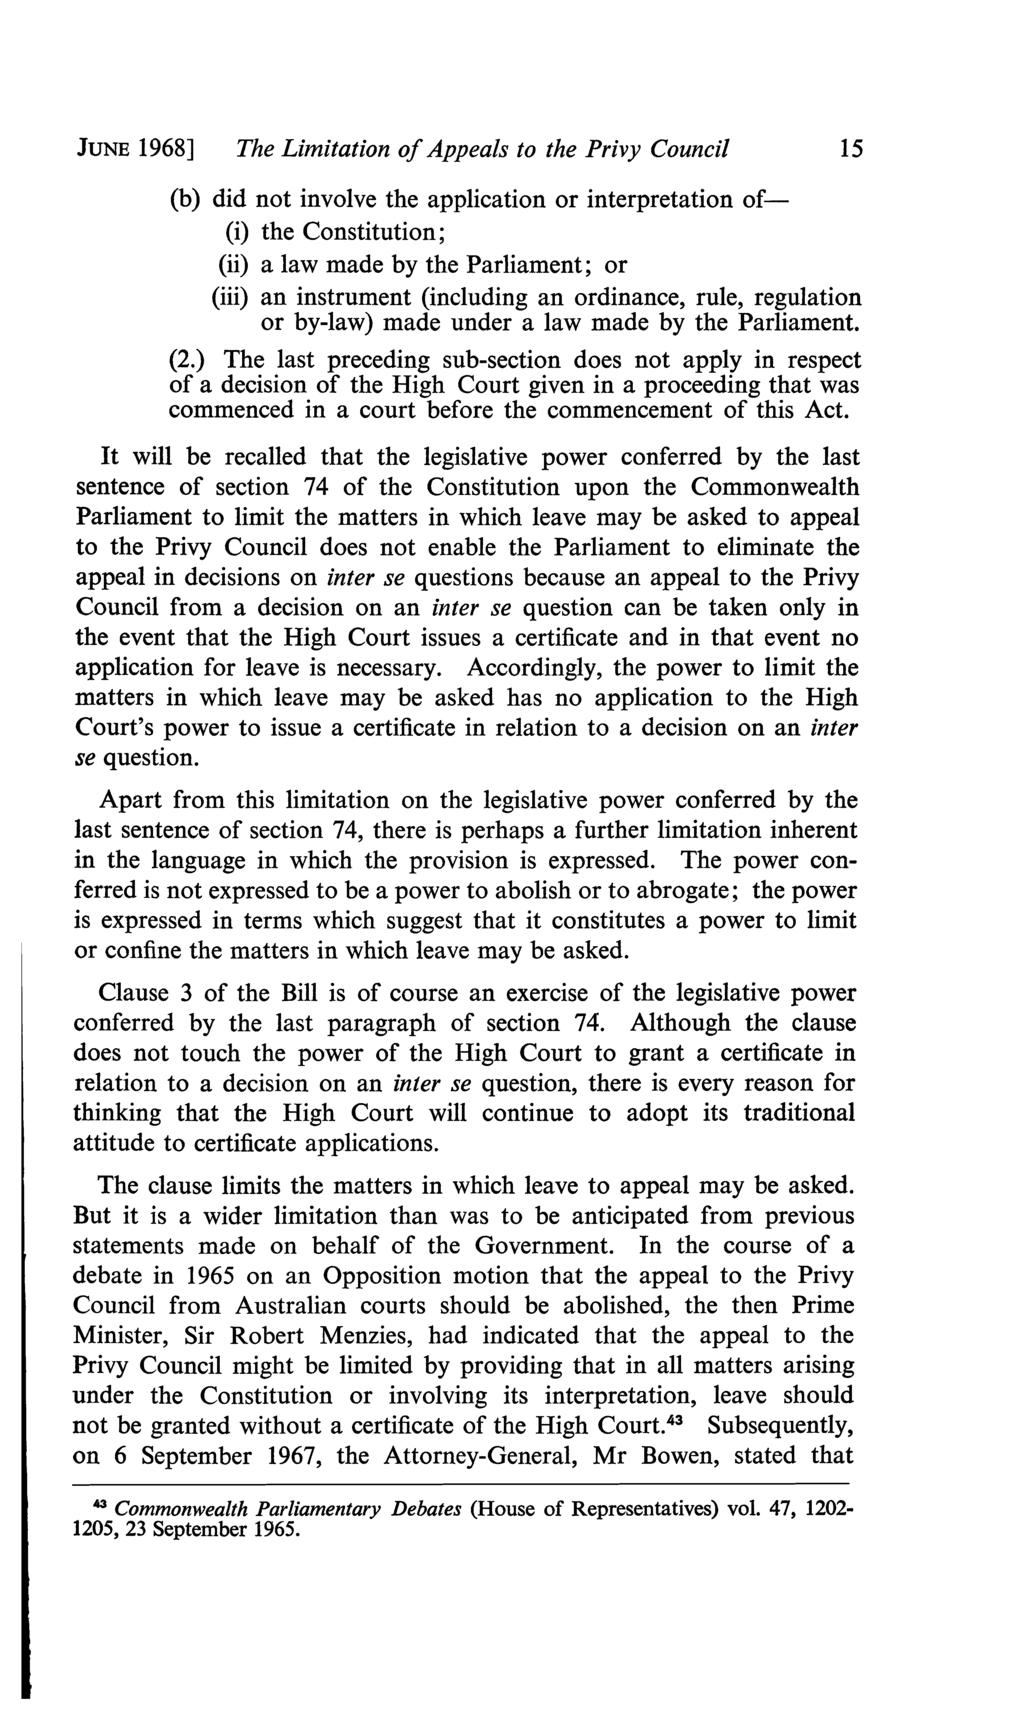 JUNE 1968] The Limitation ofappeals to the Privy Council 15 (b) did not involve the application or interpretation of (i) the Constitution; (ii) a law made by the Parliament; or (iii) an instrument